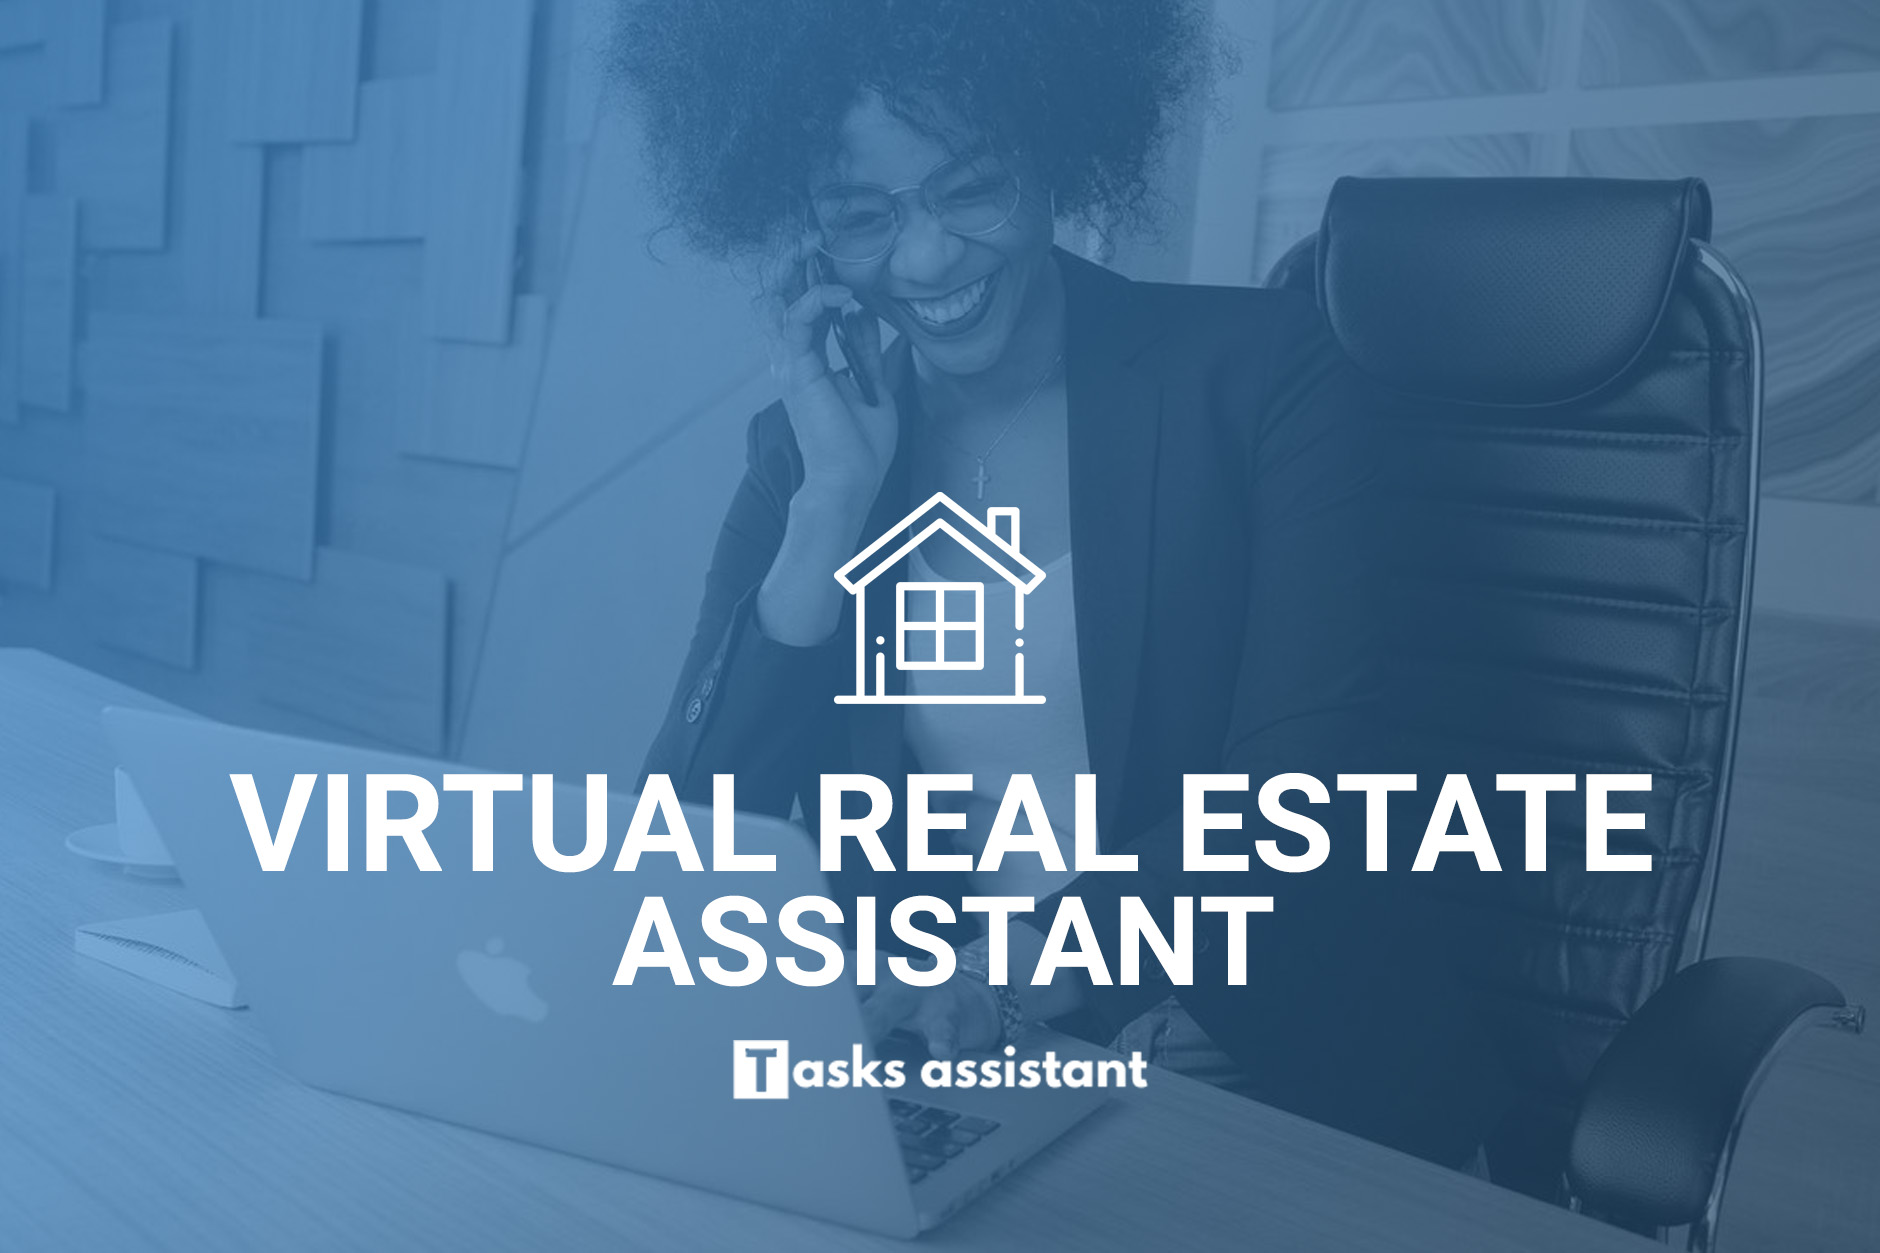 Virtual Real Estate Assistant